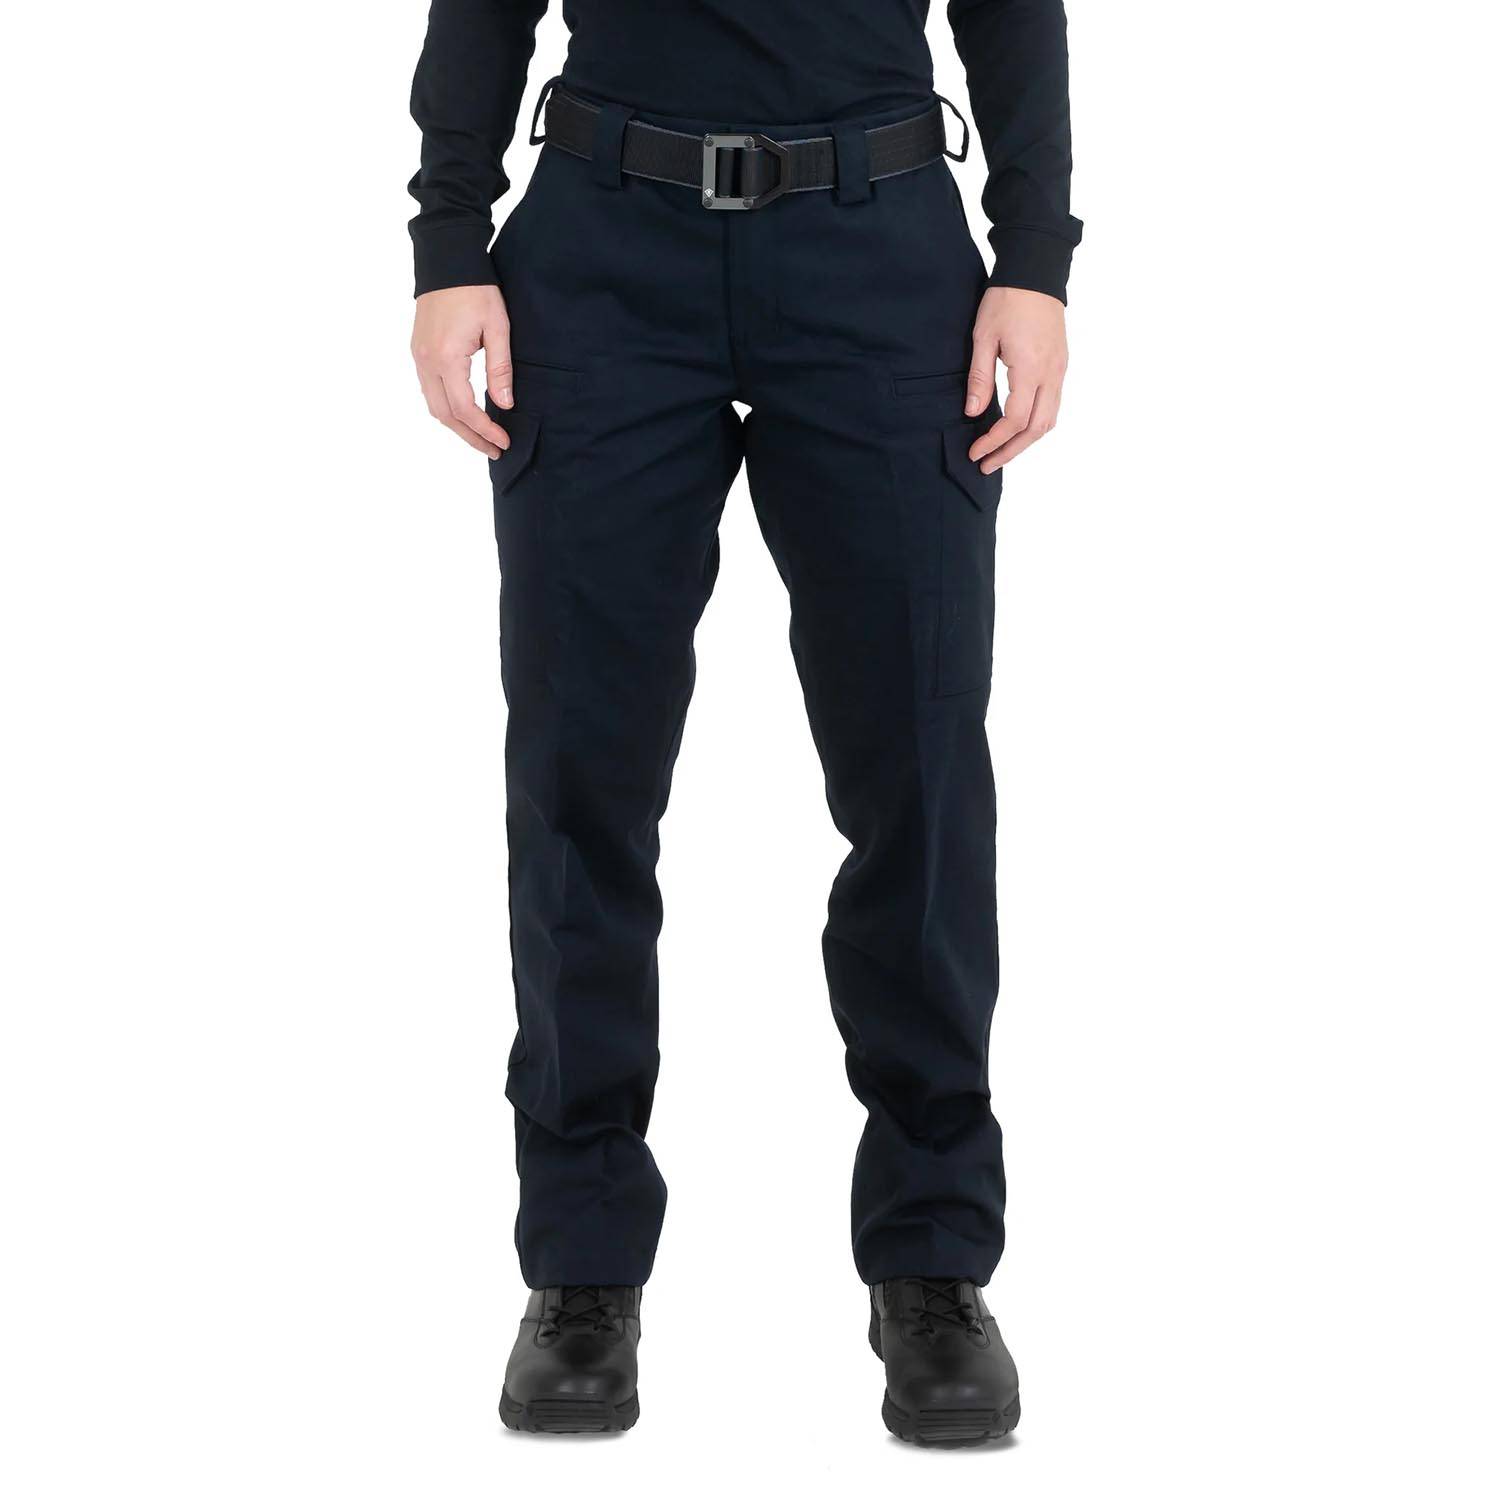 First Tactical Women's Cotton Cargo Station Pants